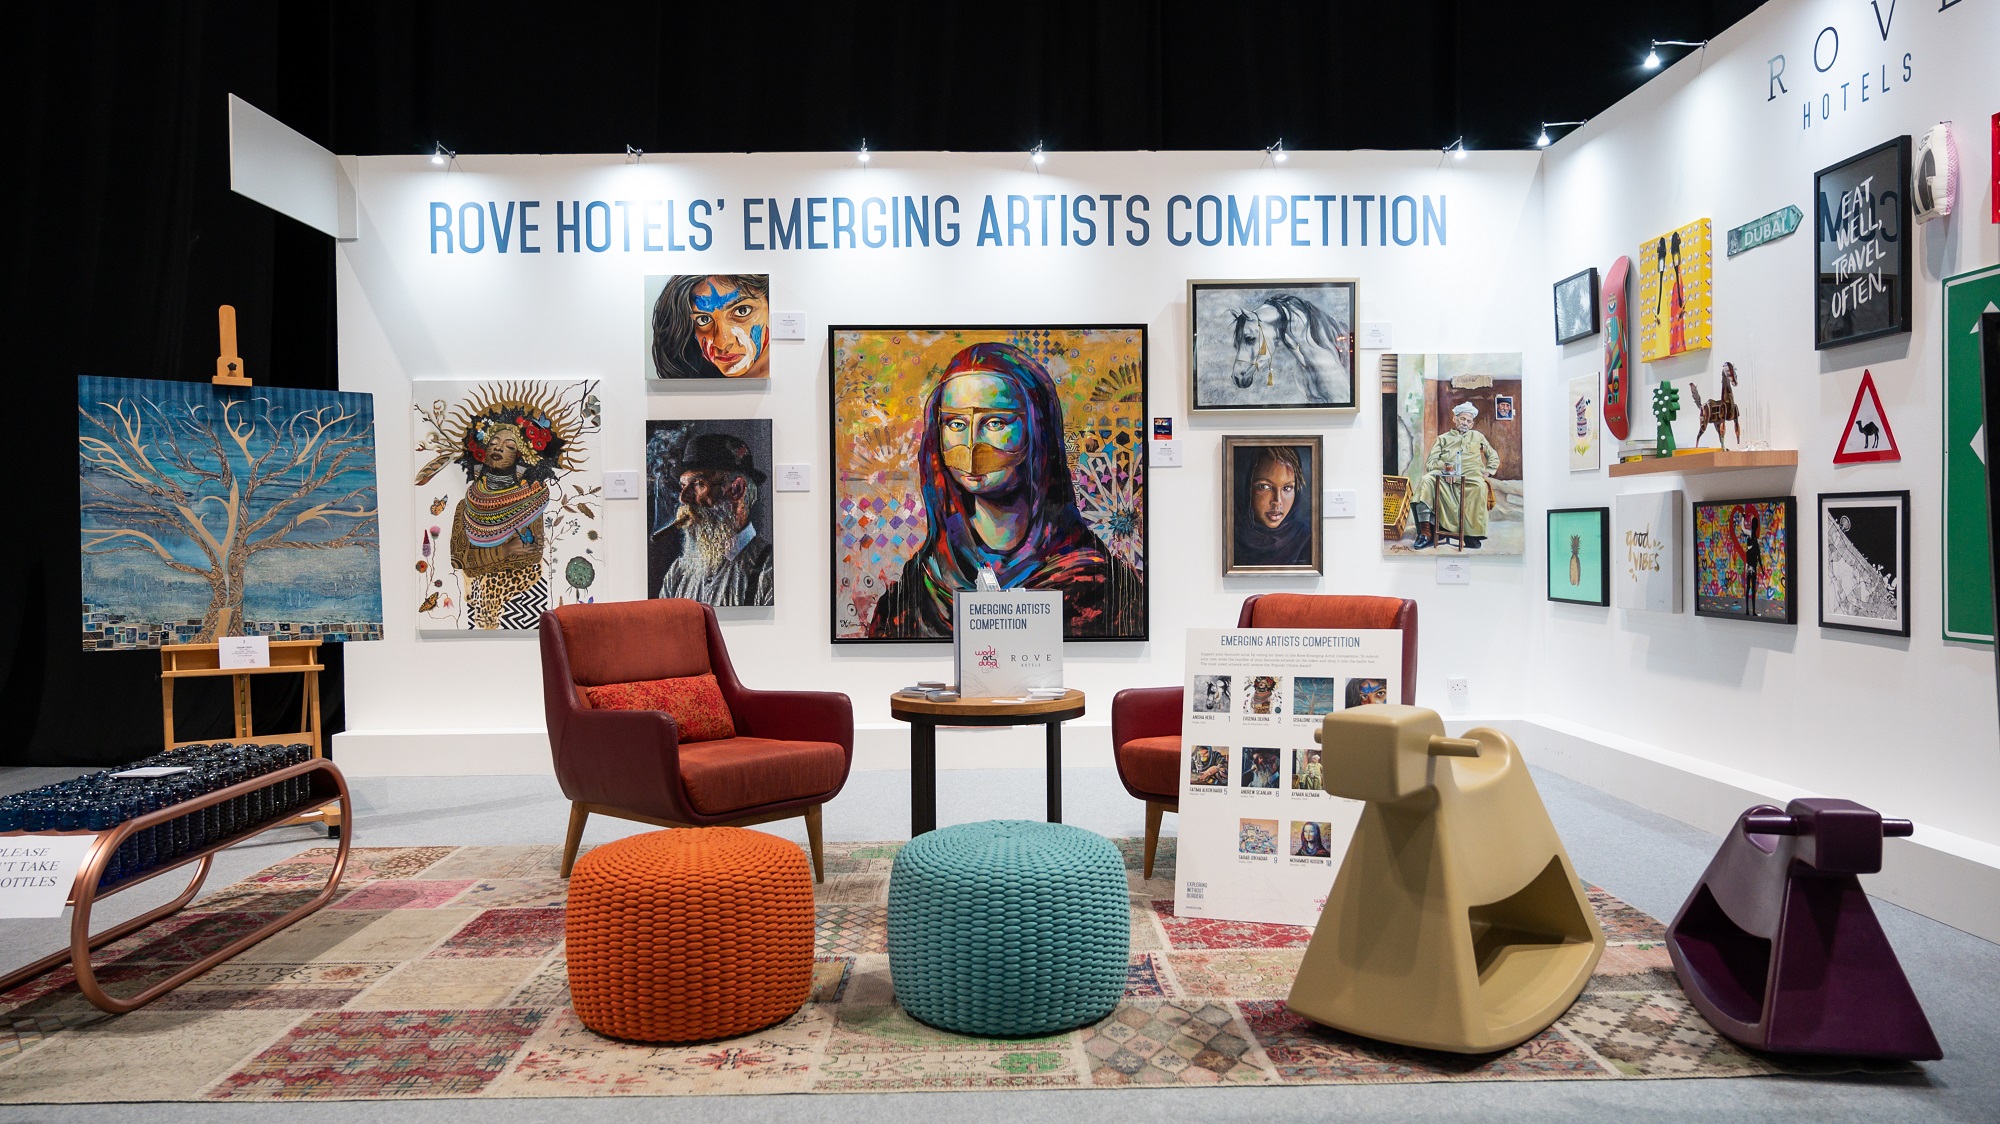 WORLD ART DUBAI PUTS EMERGING ARTISTS, PHOTOGRAPHERS AND STUDENTS IN THE FRAME